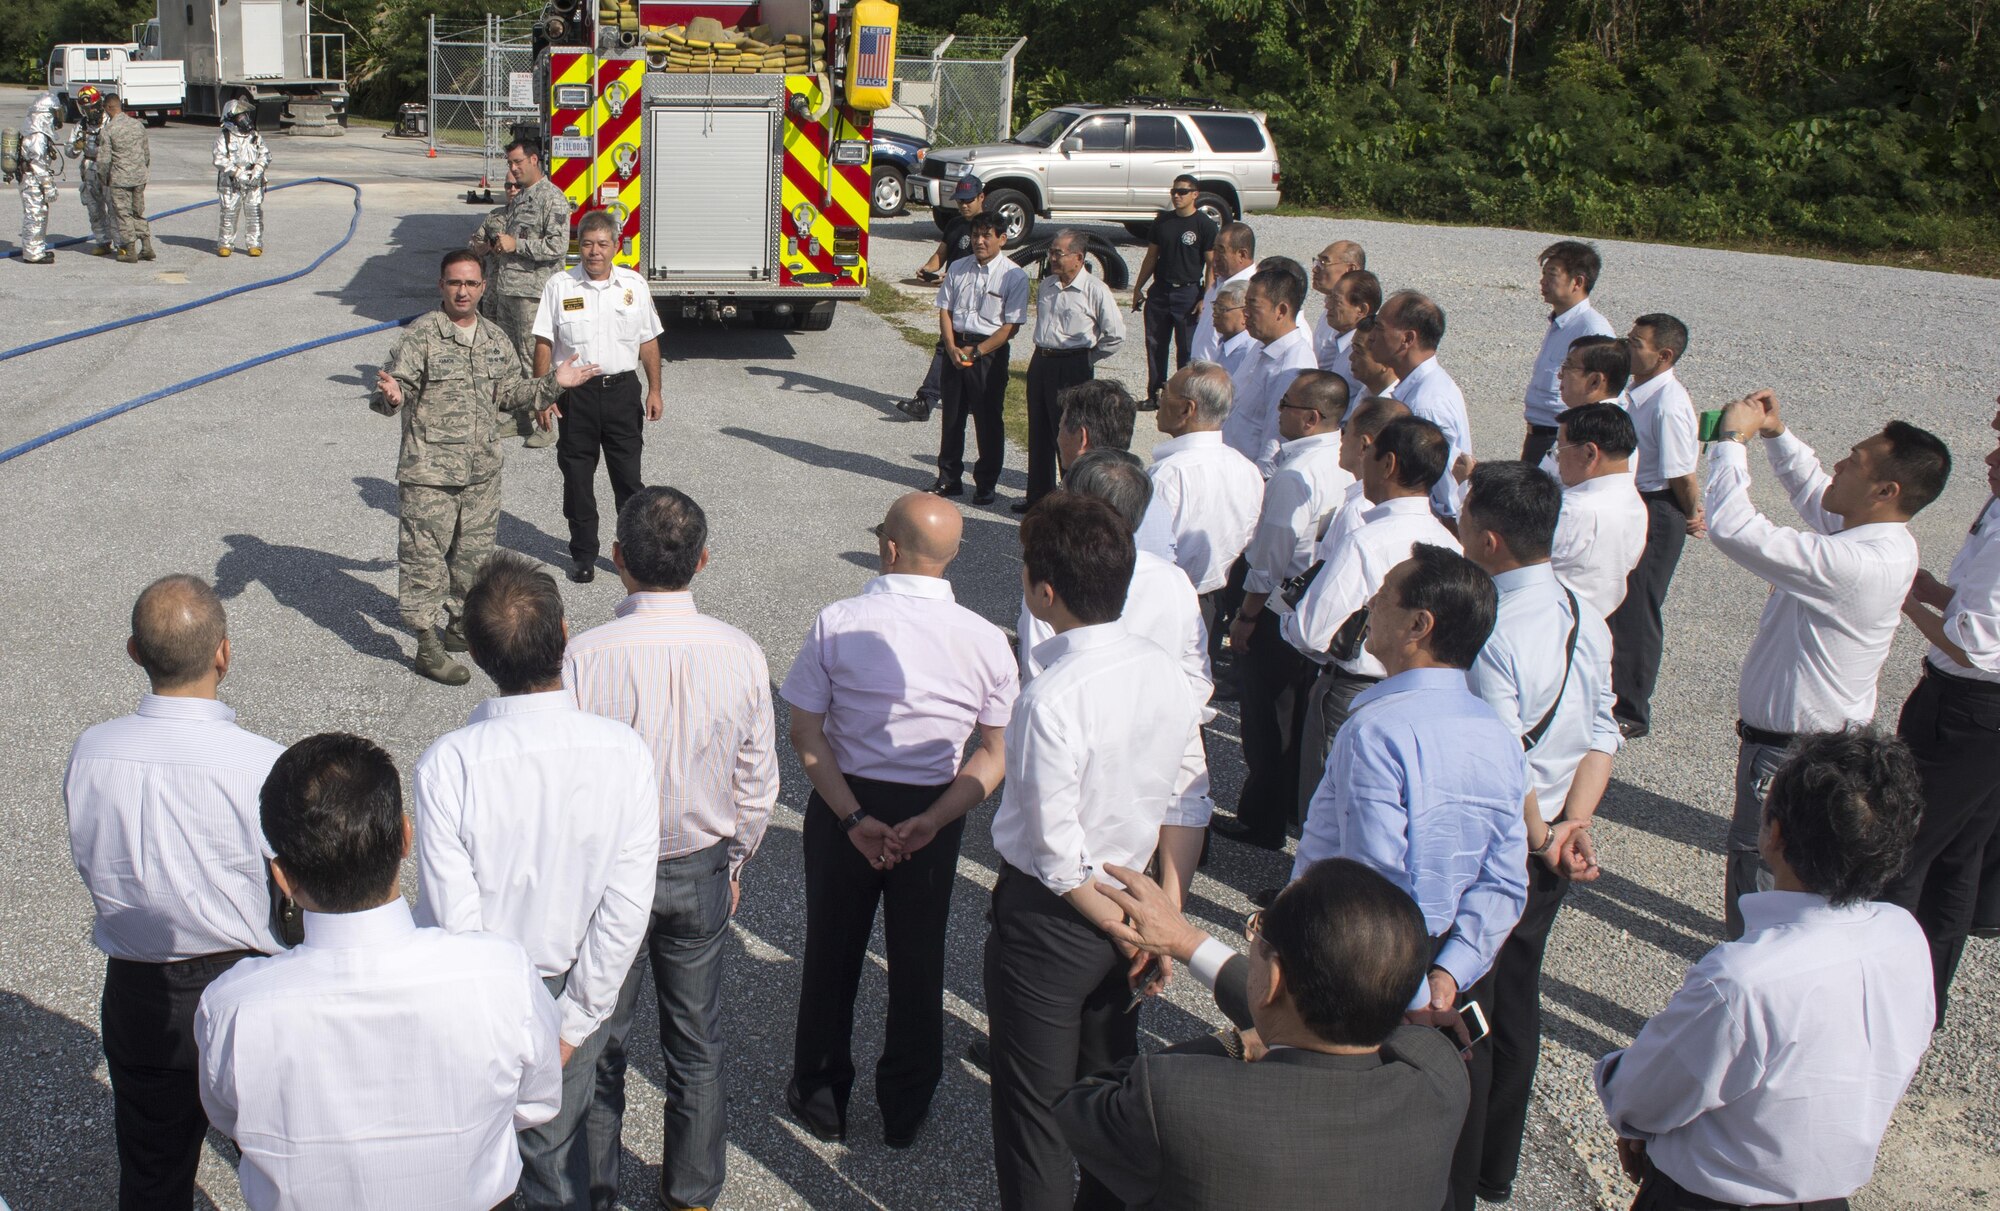 U.S. Air Force Master Sgt. Jon Ammon, 18th Civil Engineer Squadron assistant chief of operations, gives a brief introduction to a live firefighting demonstration, Nov. 24, 2015, at Kadena Air Base, Japan. Firefighters from the 18th CES performed a demonstration for Tokyo and Okinawan firefighter cadets and explained the methods and equipment used to extinguish aircraft fighters on an air base. (U.S. Air Force photo by Senior Airman Omari Bernard)